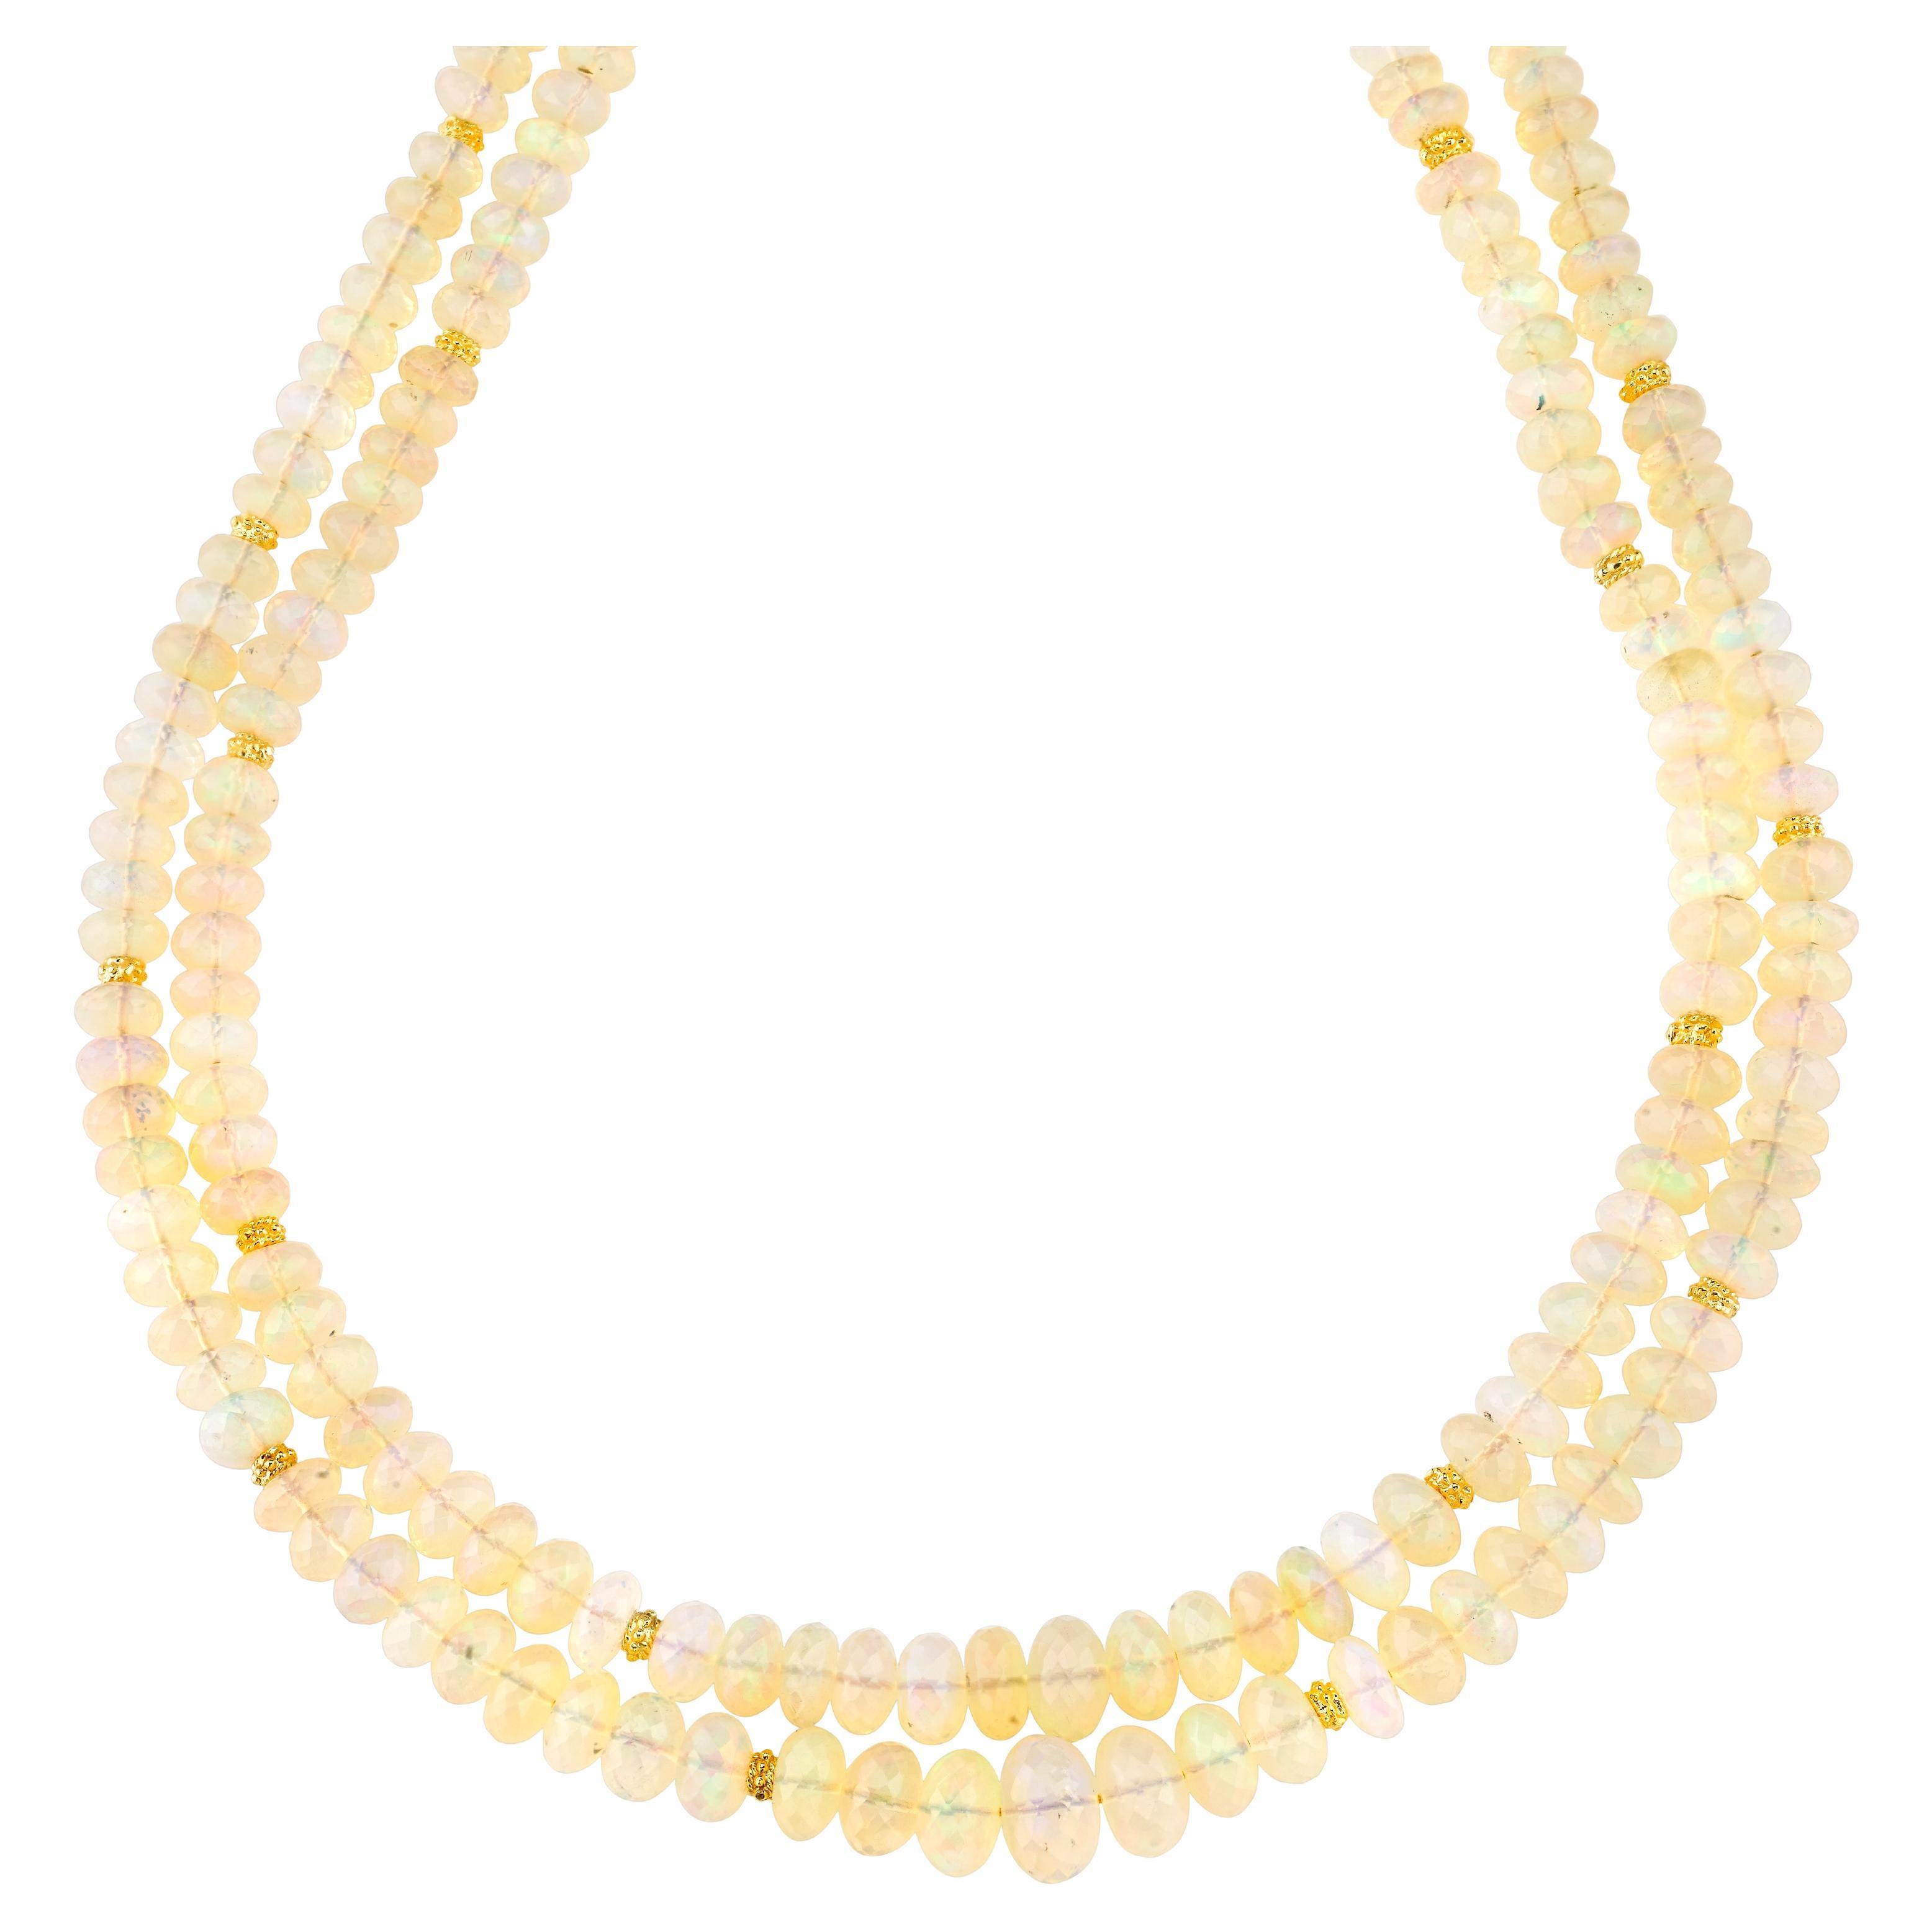 Double Strand Opal Bead Necklace, 170.45 Carats Total with Yellow Gold Accents